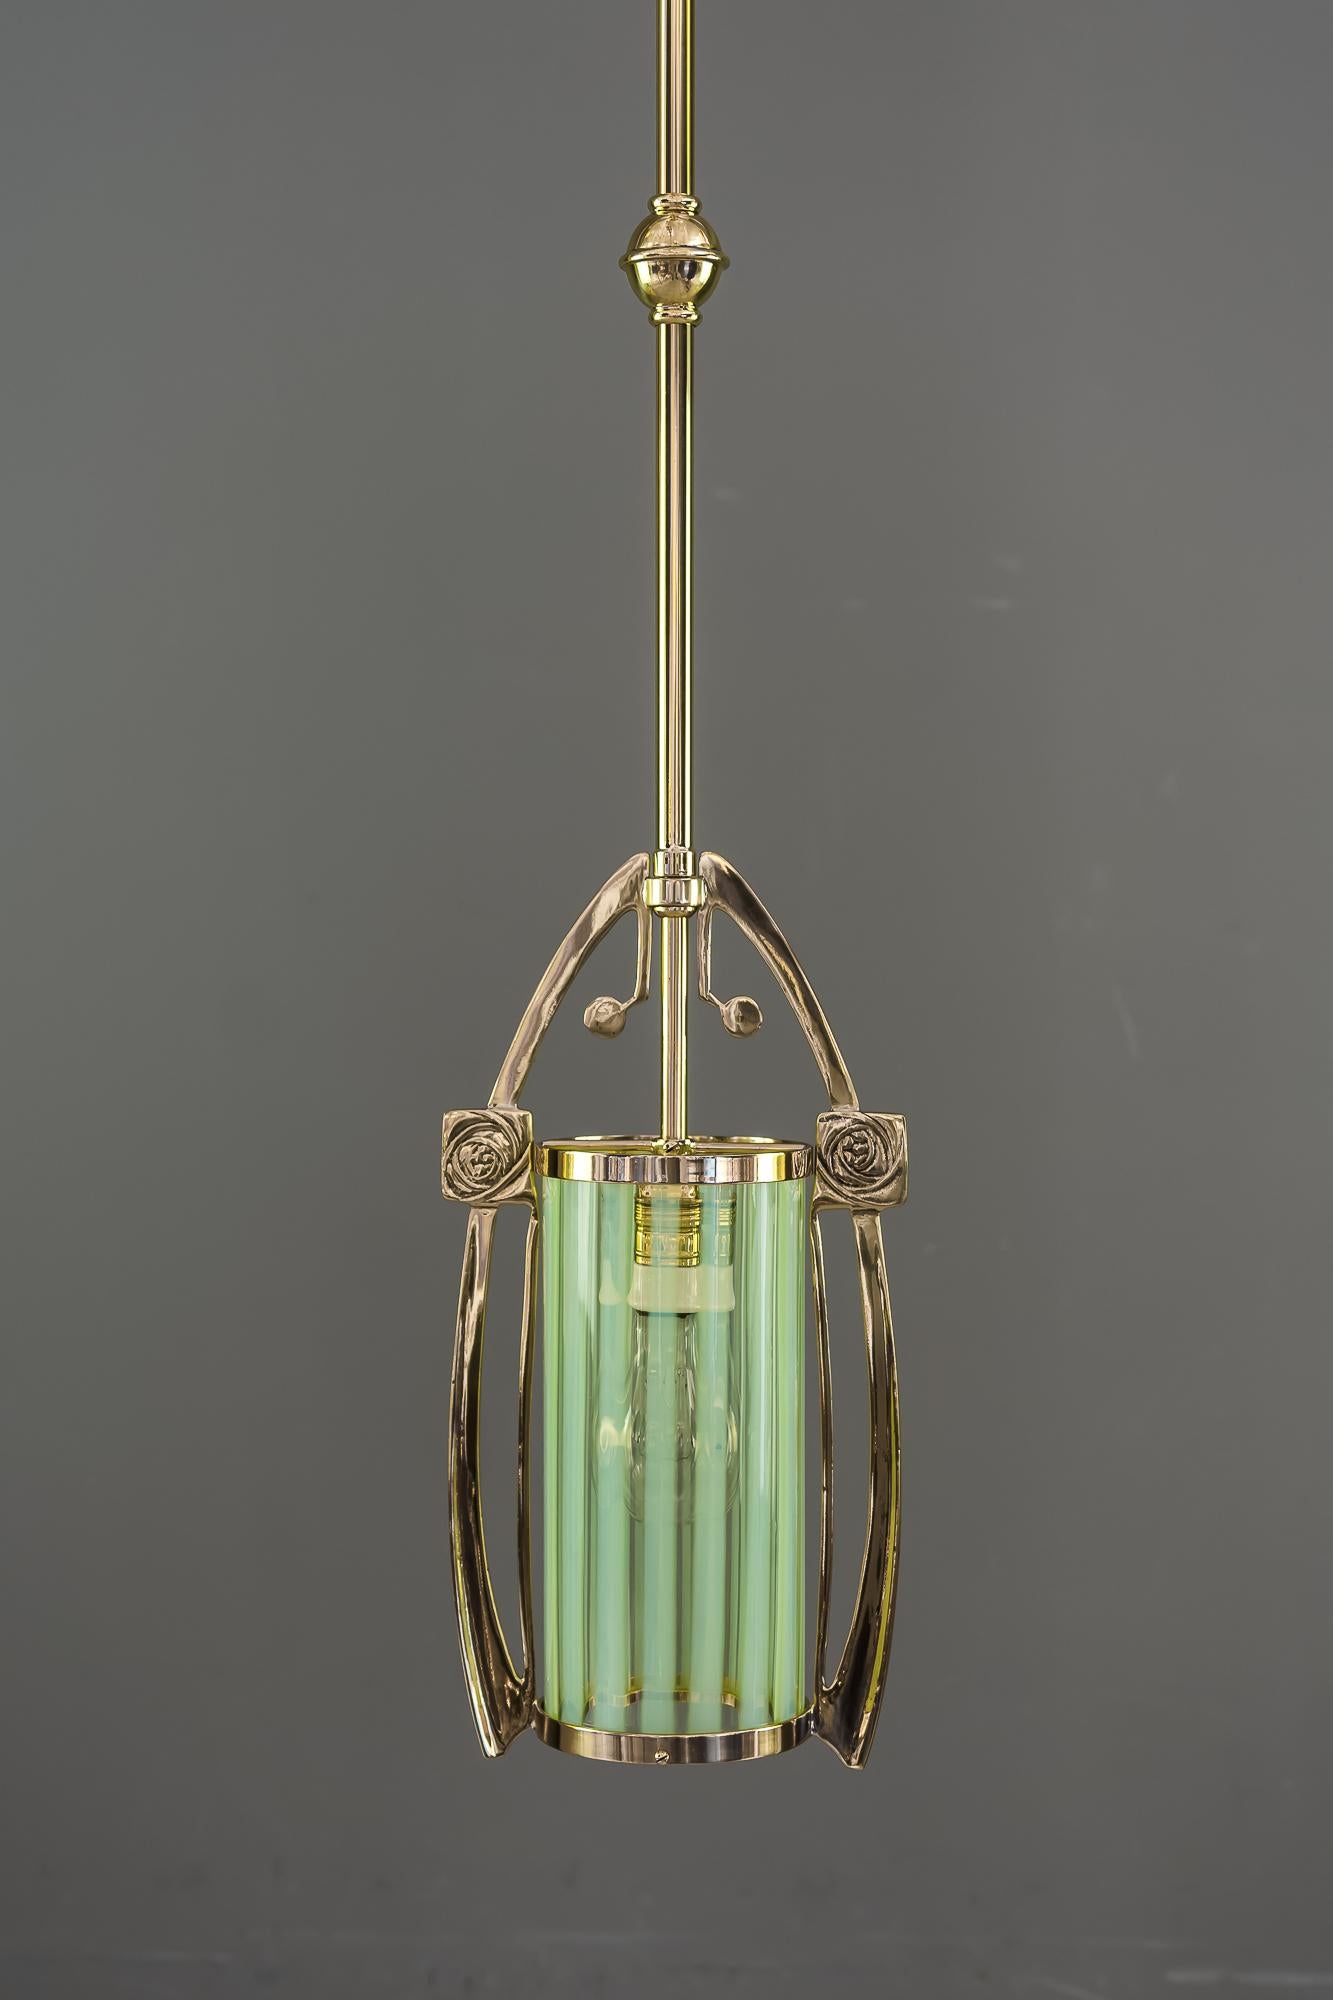 3x jugendstil pendant with original opaline glass shades Vienna around 1910s.
Brass polished and stove enameled.
Original opaline glass shades.
The price is for all together.